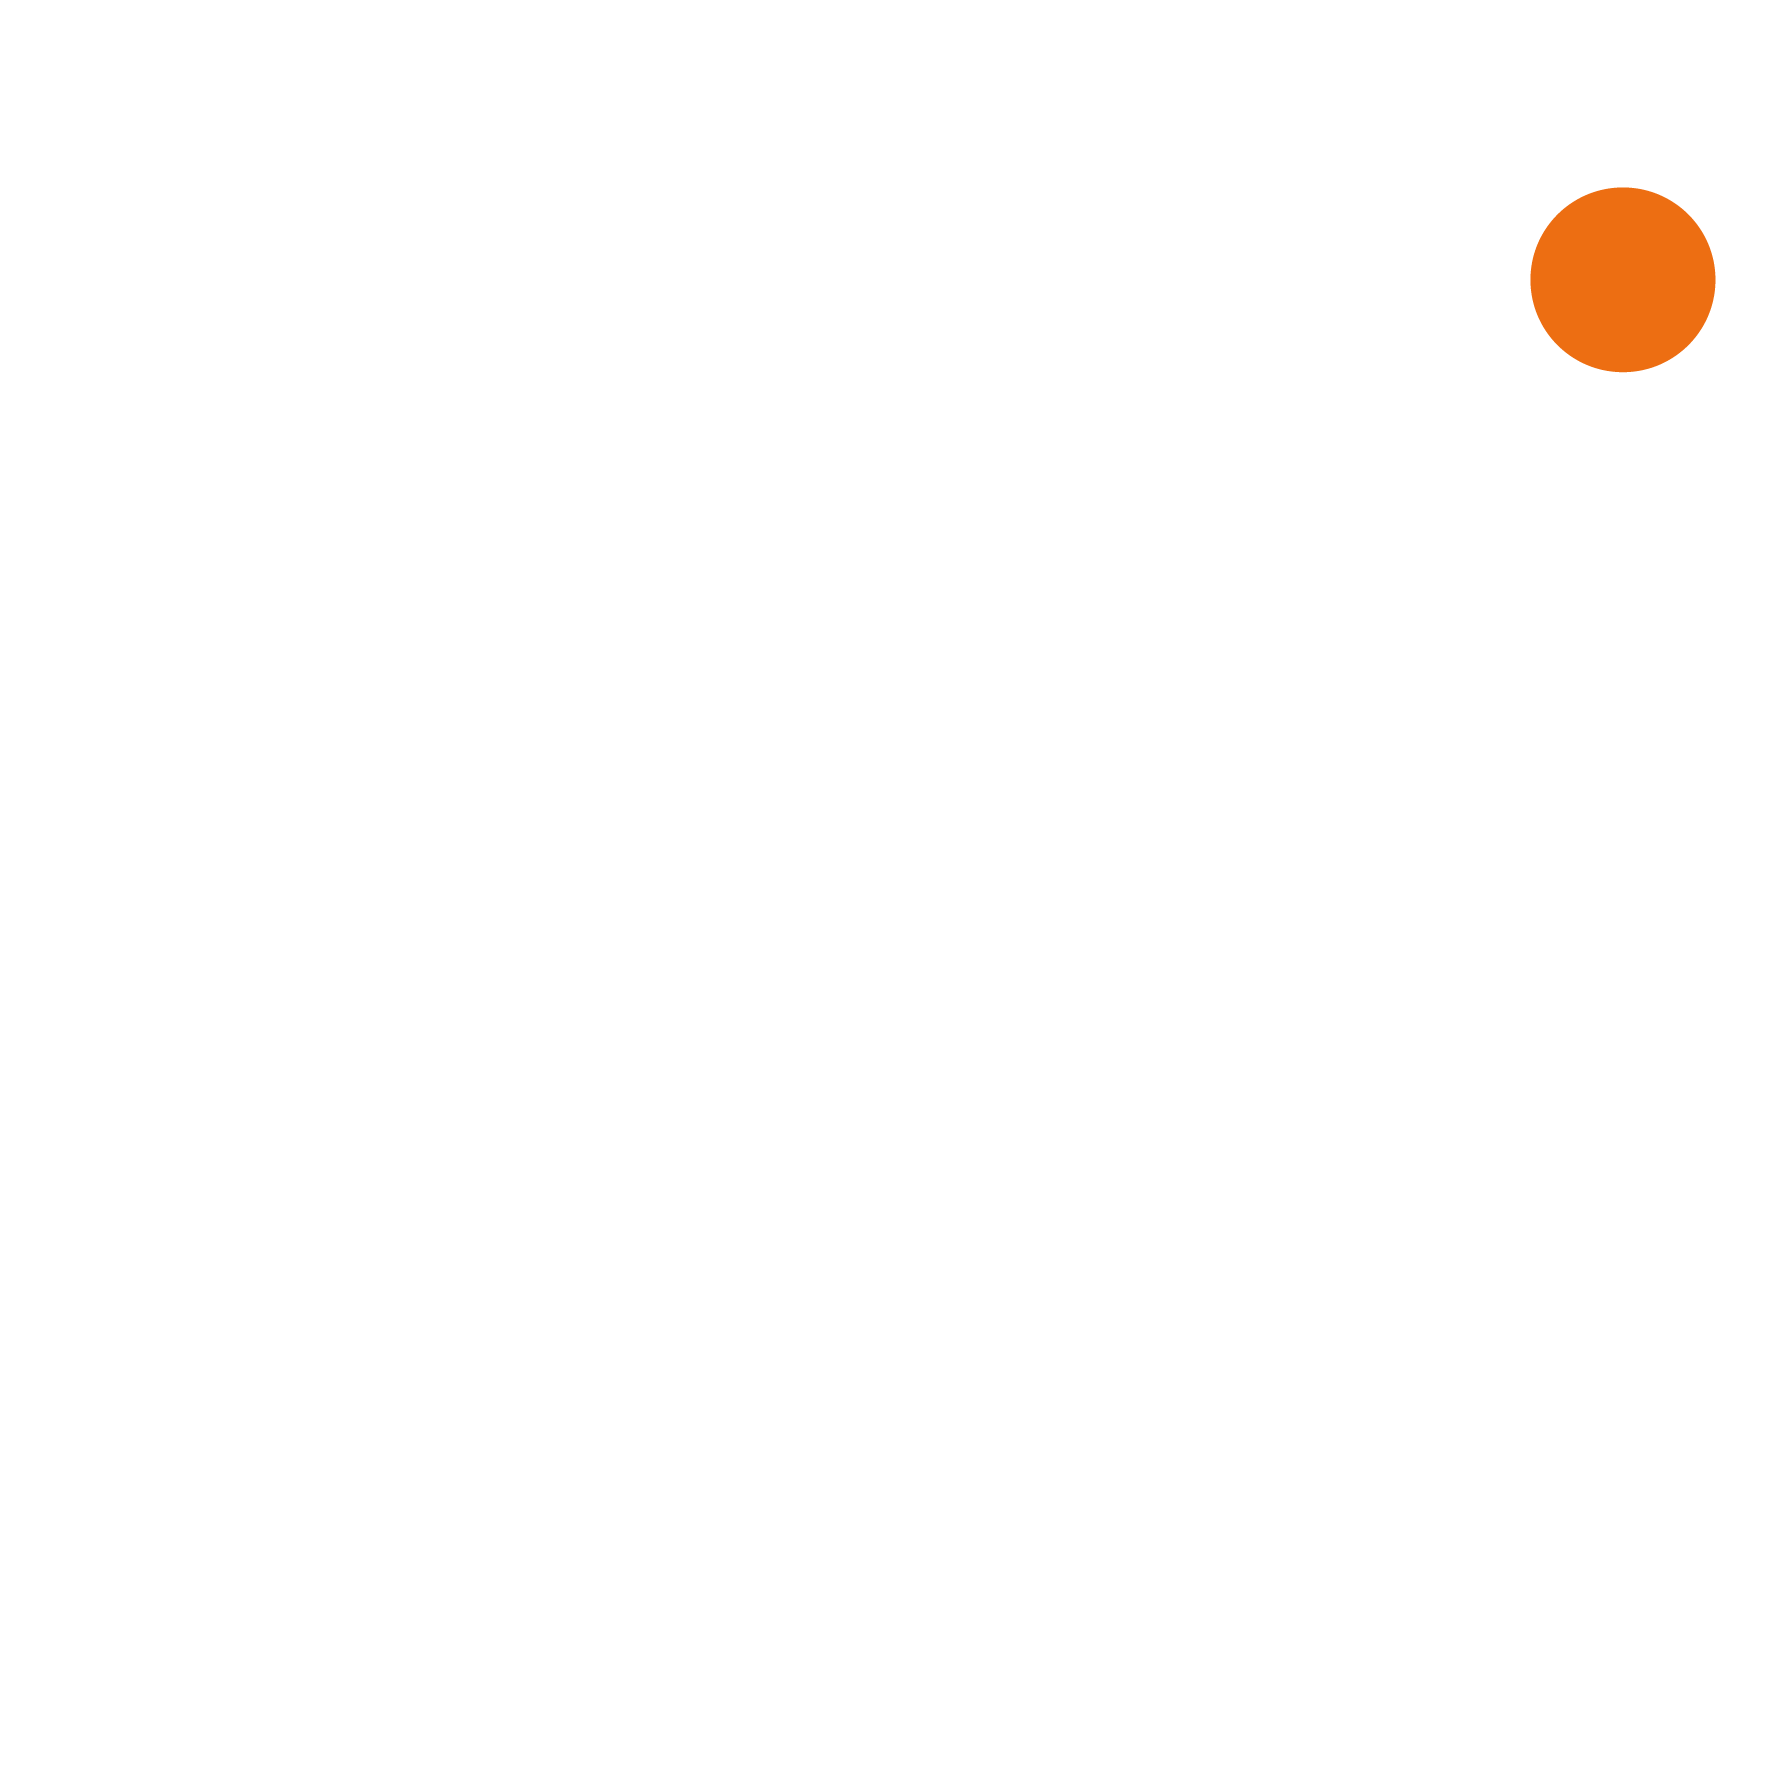 MD Consulting